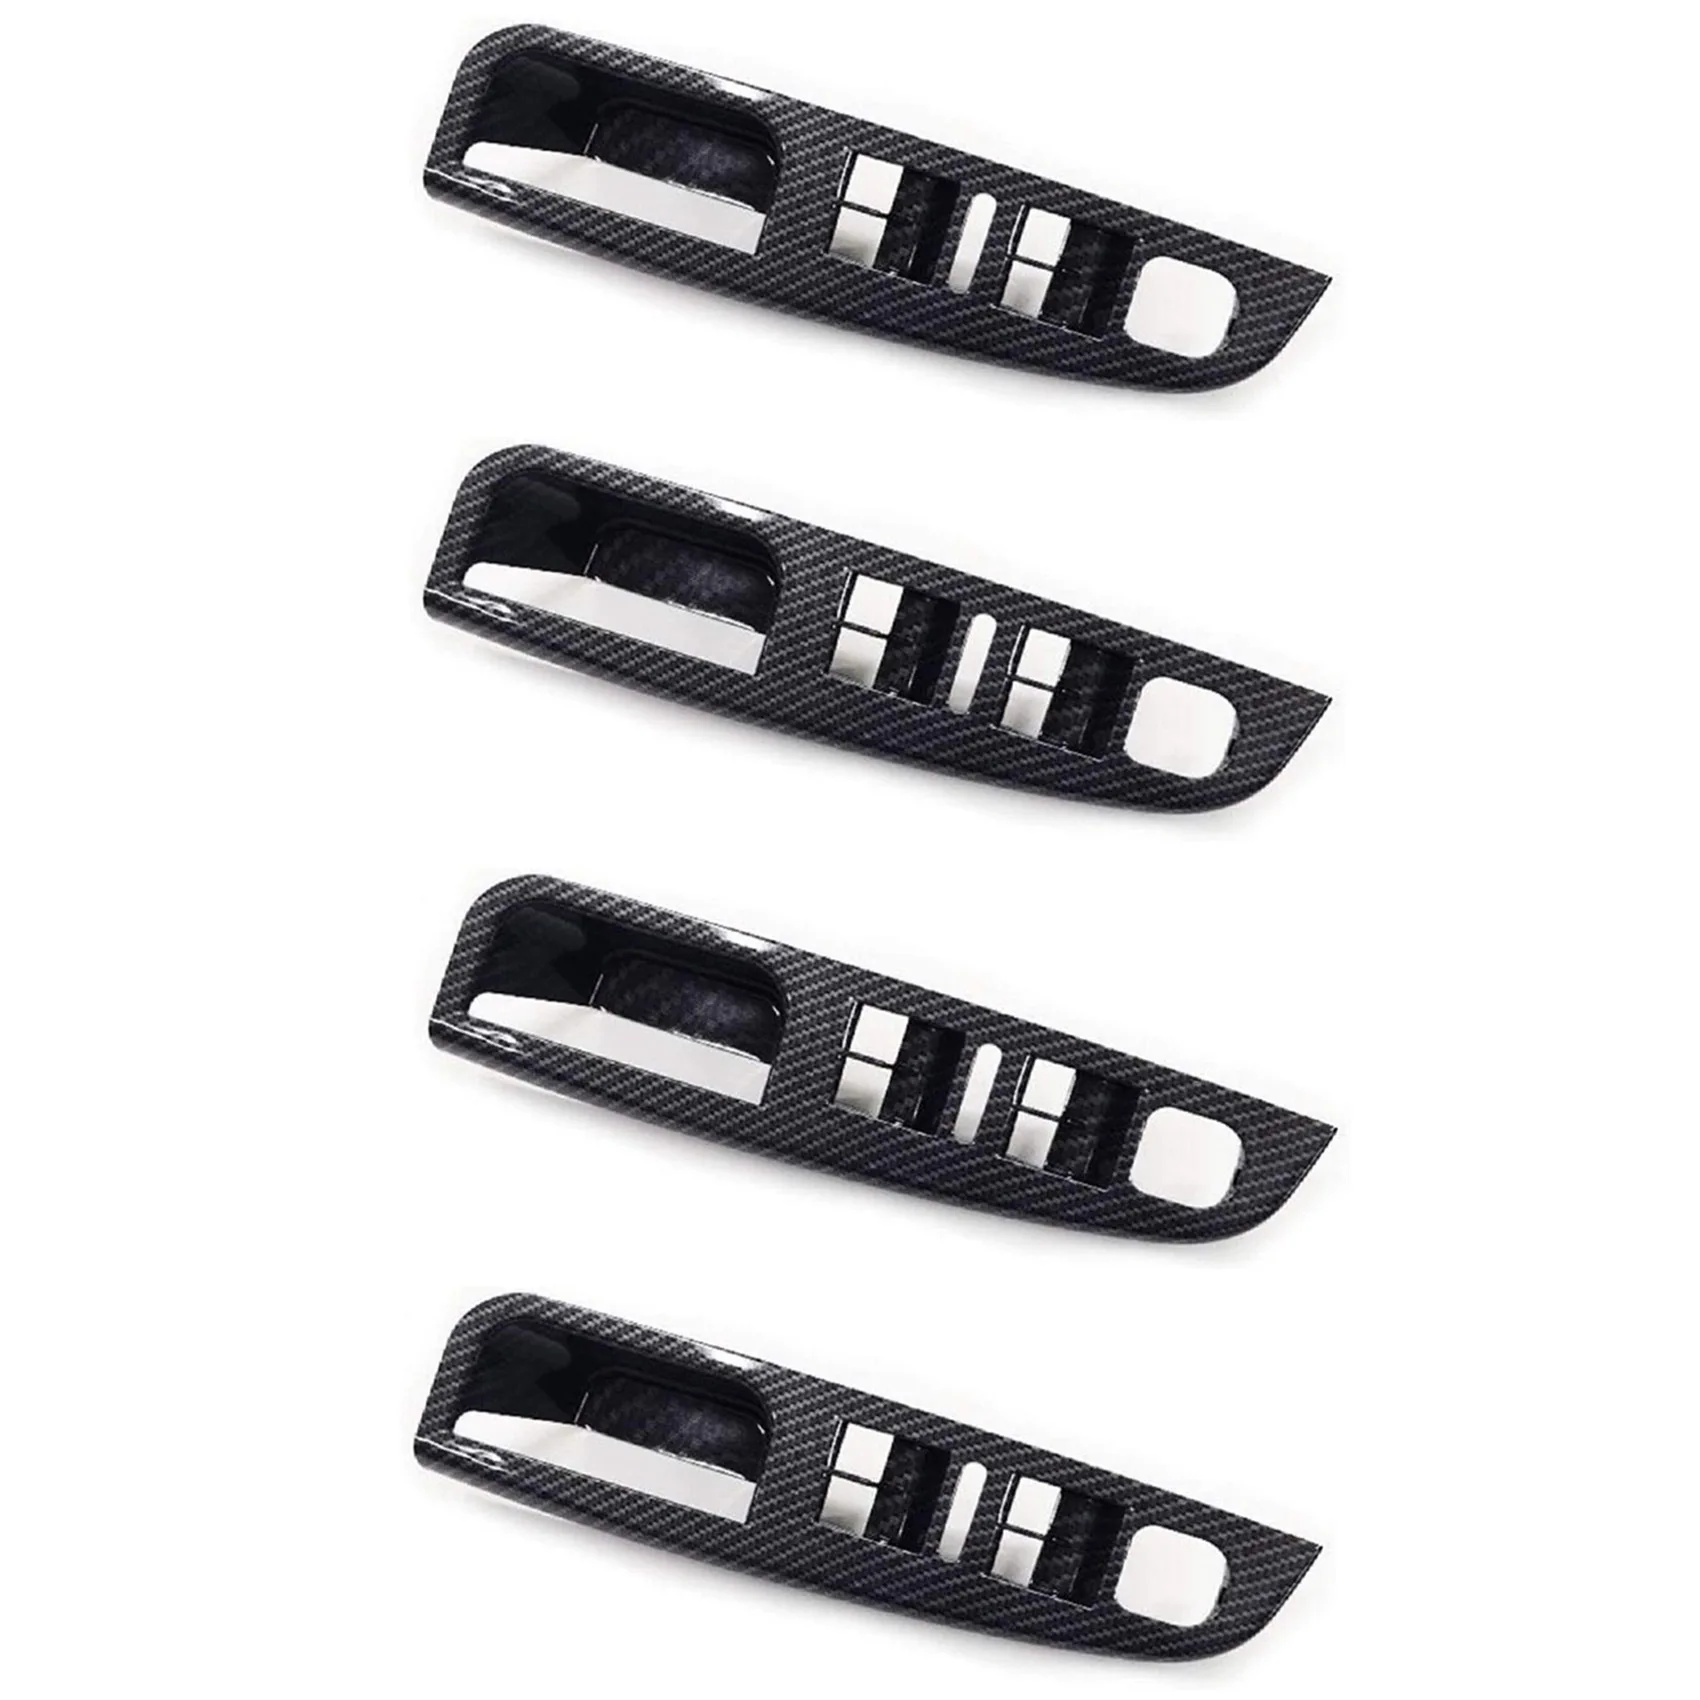 

4X Side Grab Handle Carbon Fiber Door Window Switch Control Panel Cover Trims Frame for Jetta MK5 Golf 5 2005-2009